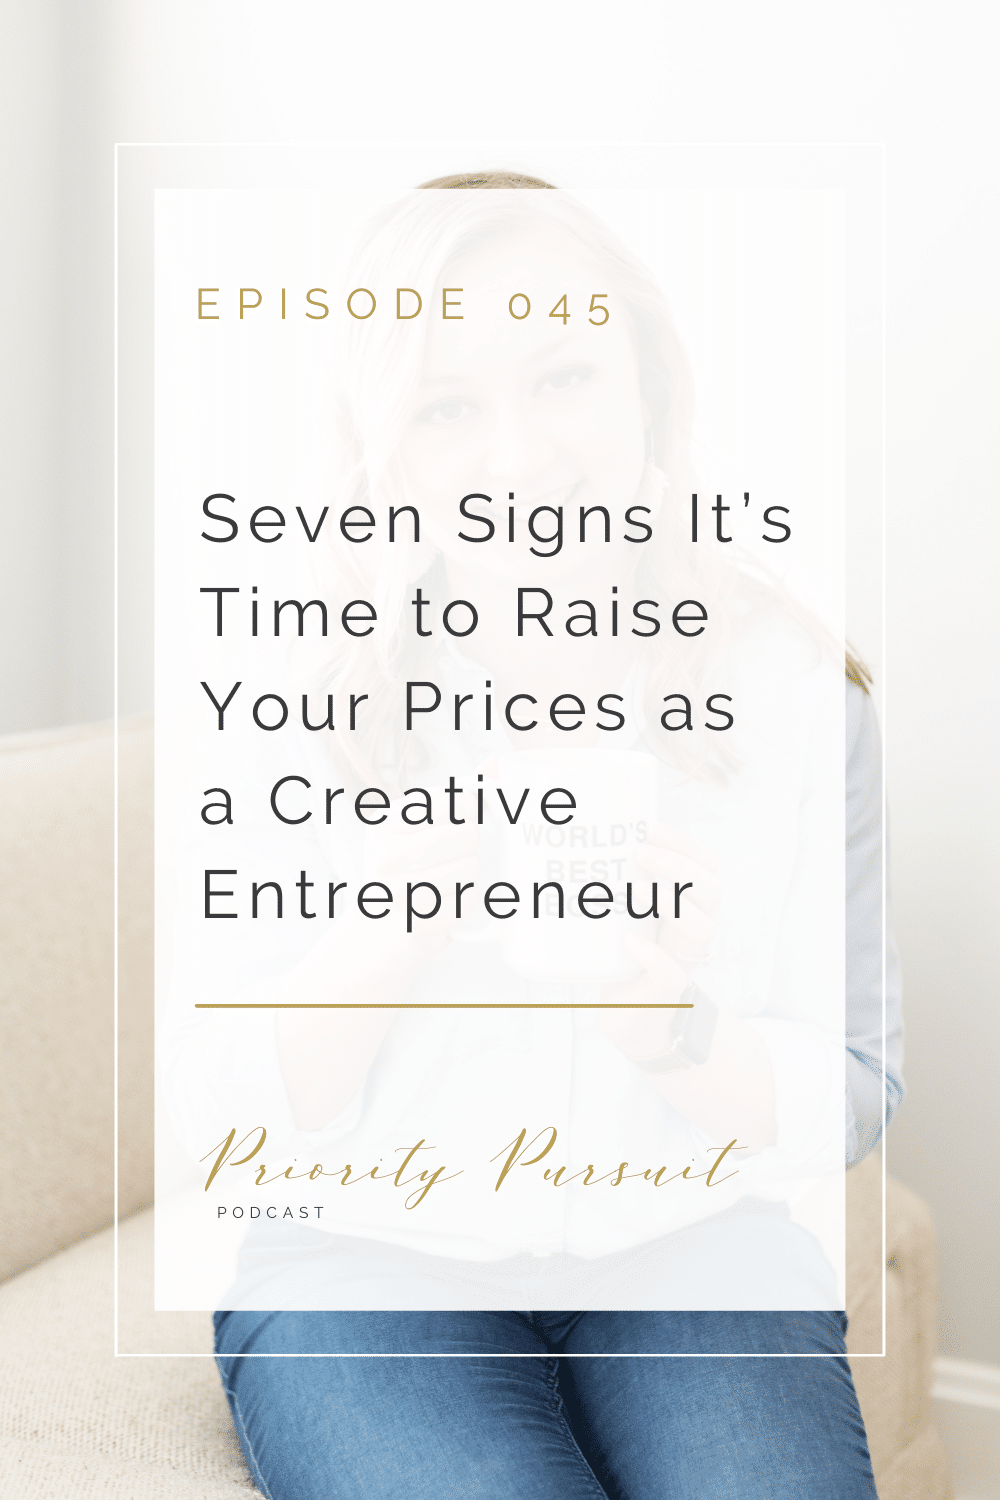 Victoria Rayburn shares seven signs it’s time to raise your prices as a creative entrepreneur in this episode of “Priority Pursuit.”